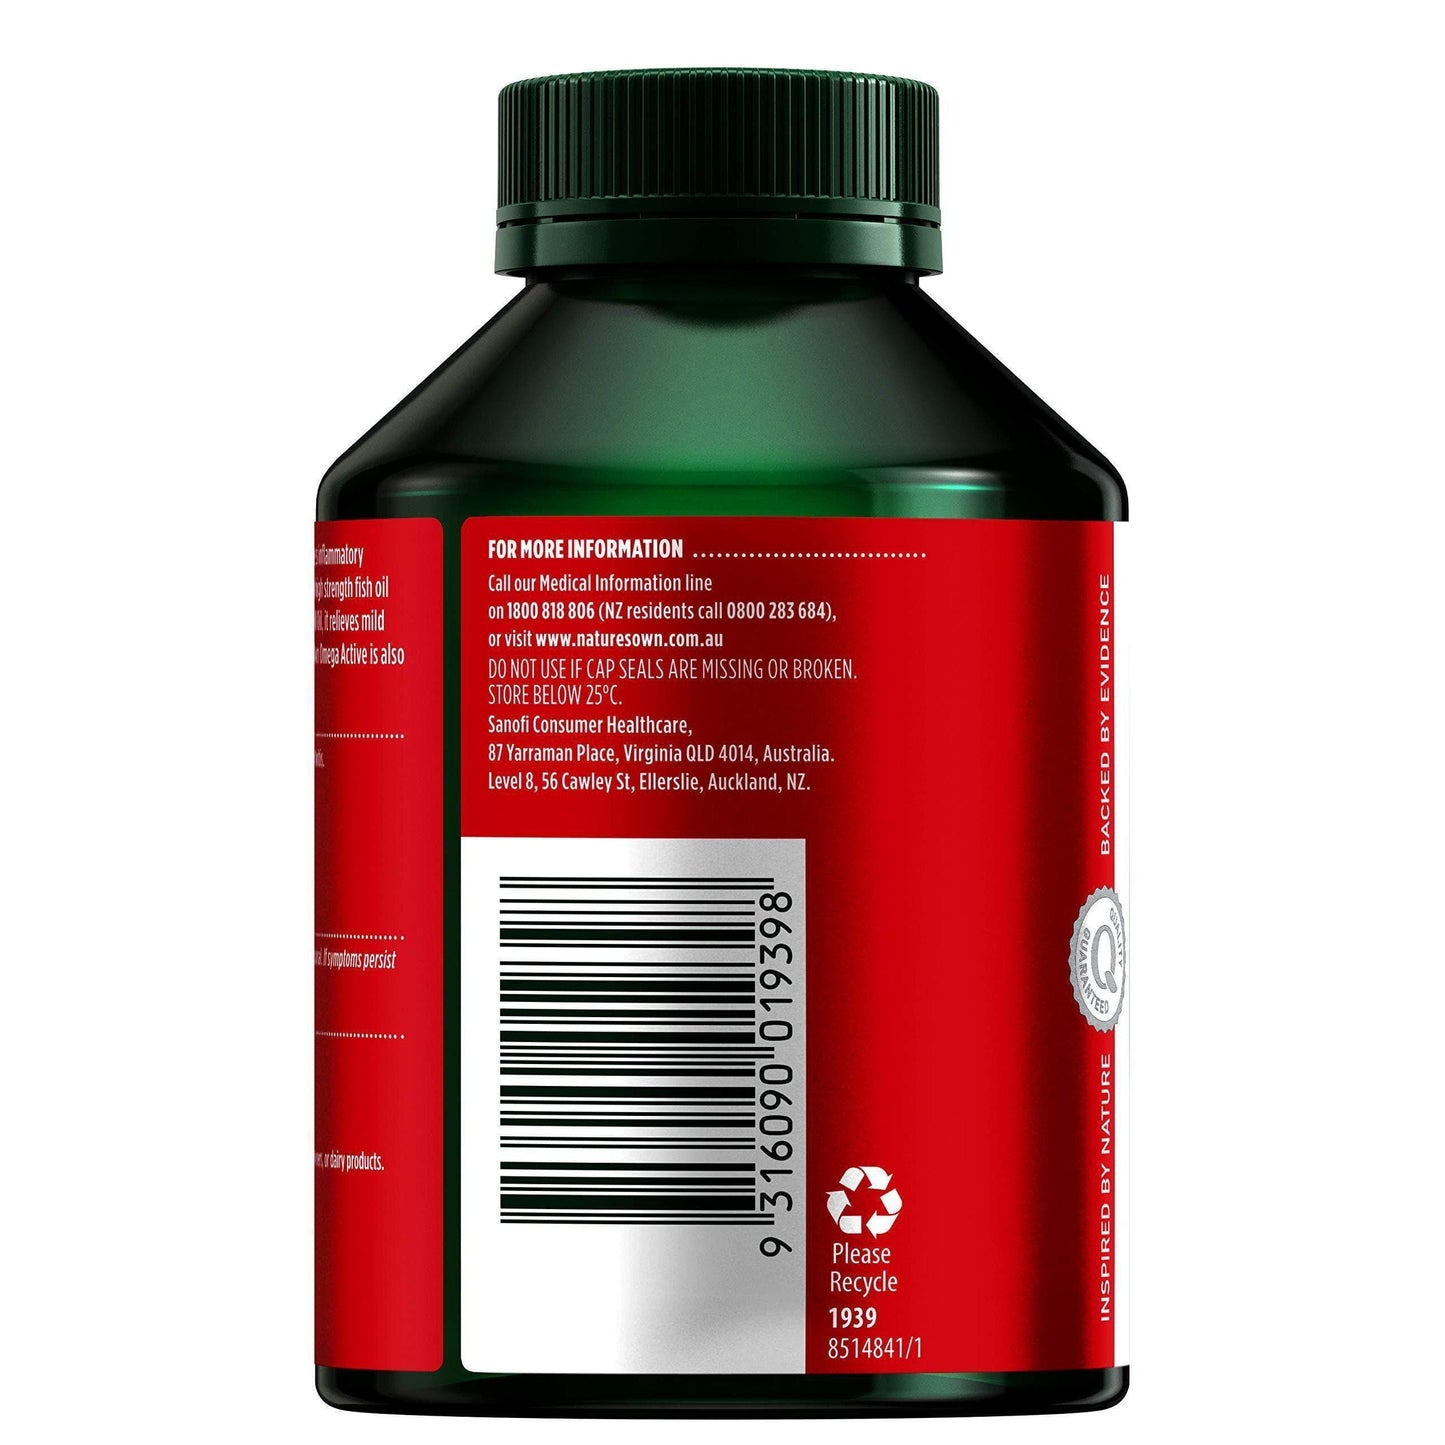 Omega Active - Supports Healthy Joints - Maintains Wellbeing and Healthy Heart & Brain-Curavita